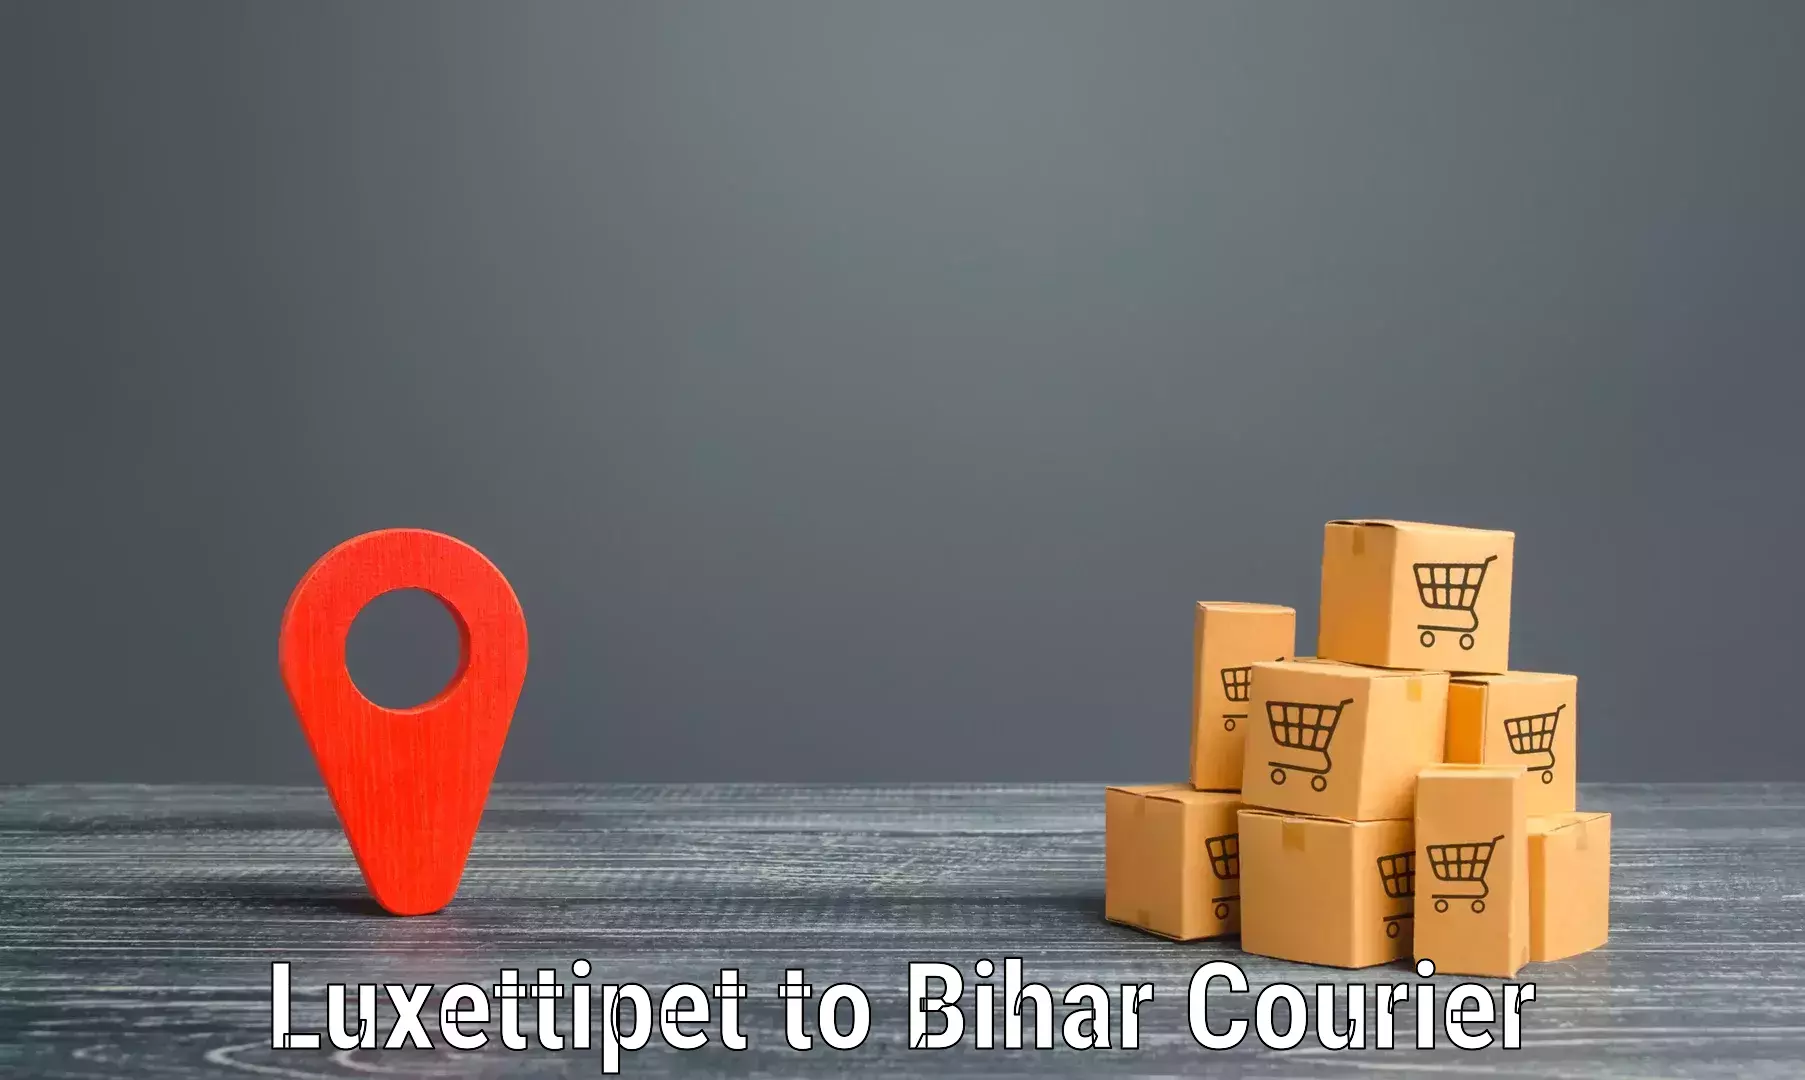 State-of-the-art courier technology Luxettipet to Katihar